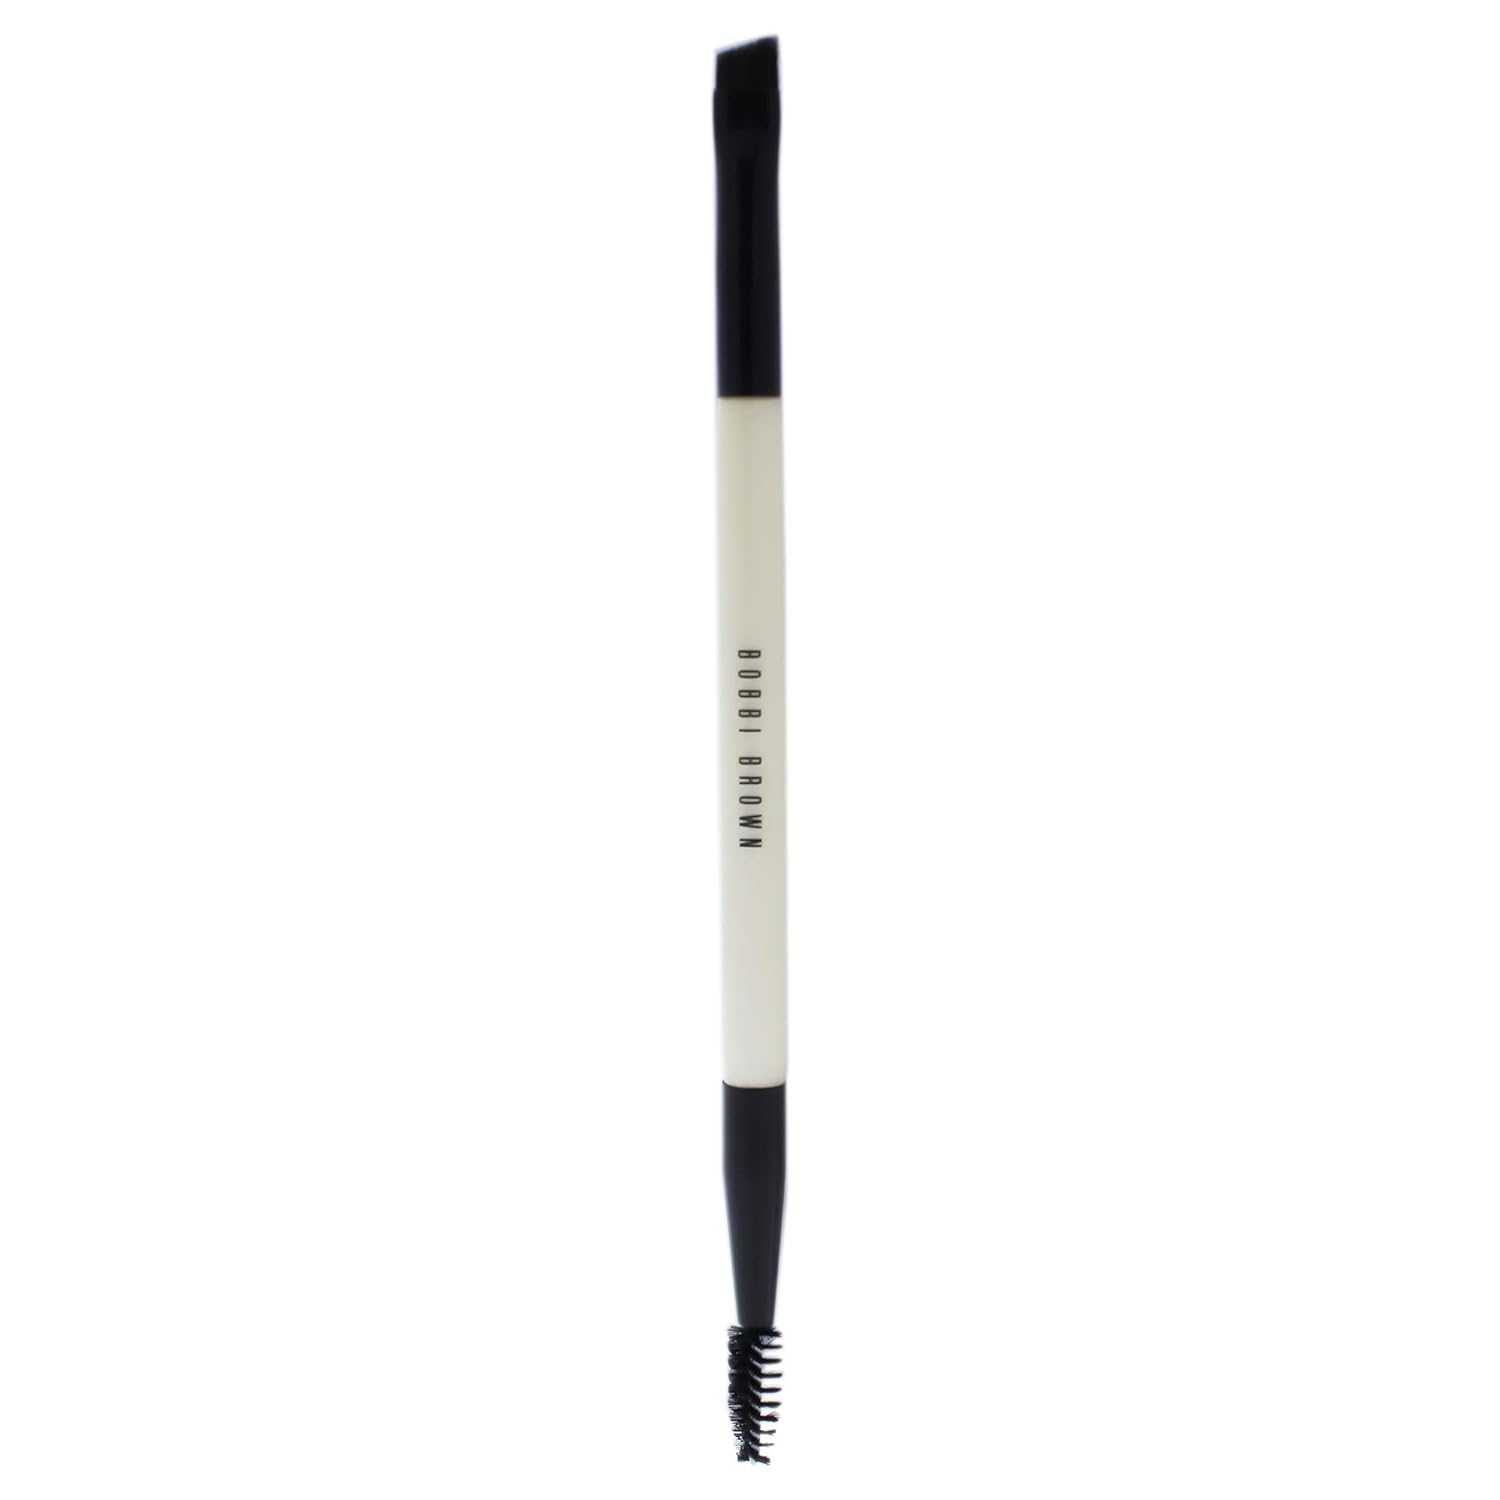 Bobbi Brown Dual-Ended Brow Definer and Groomer for Women, 1